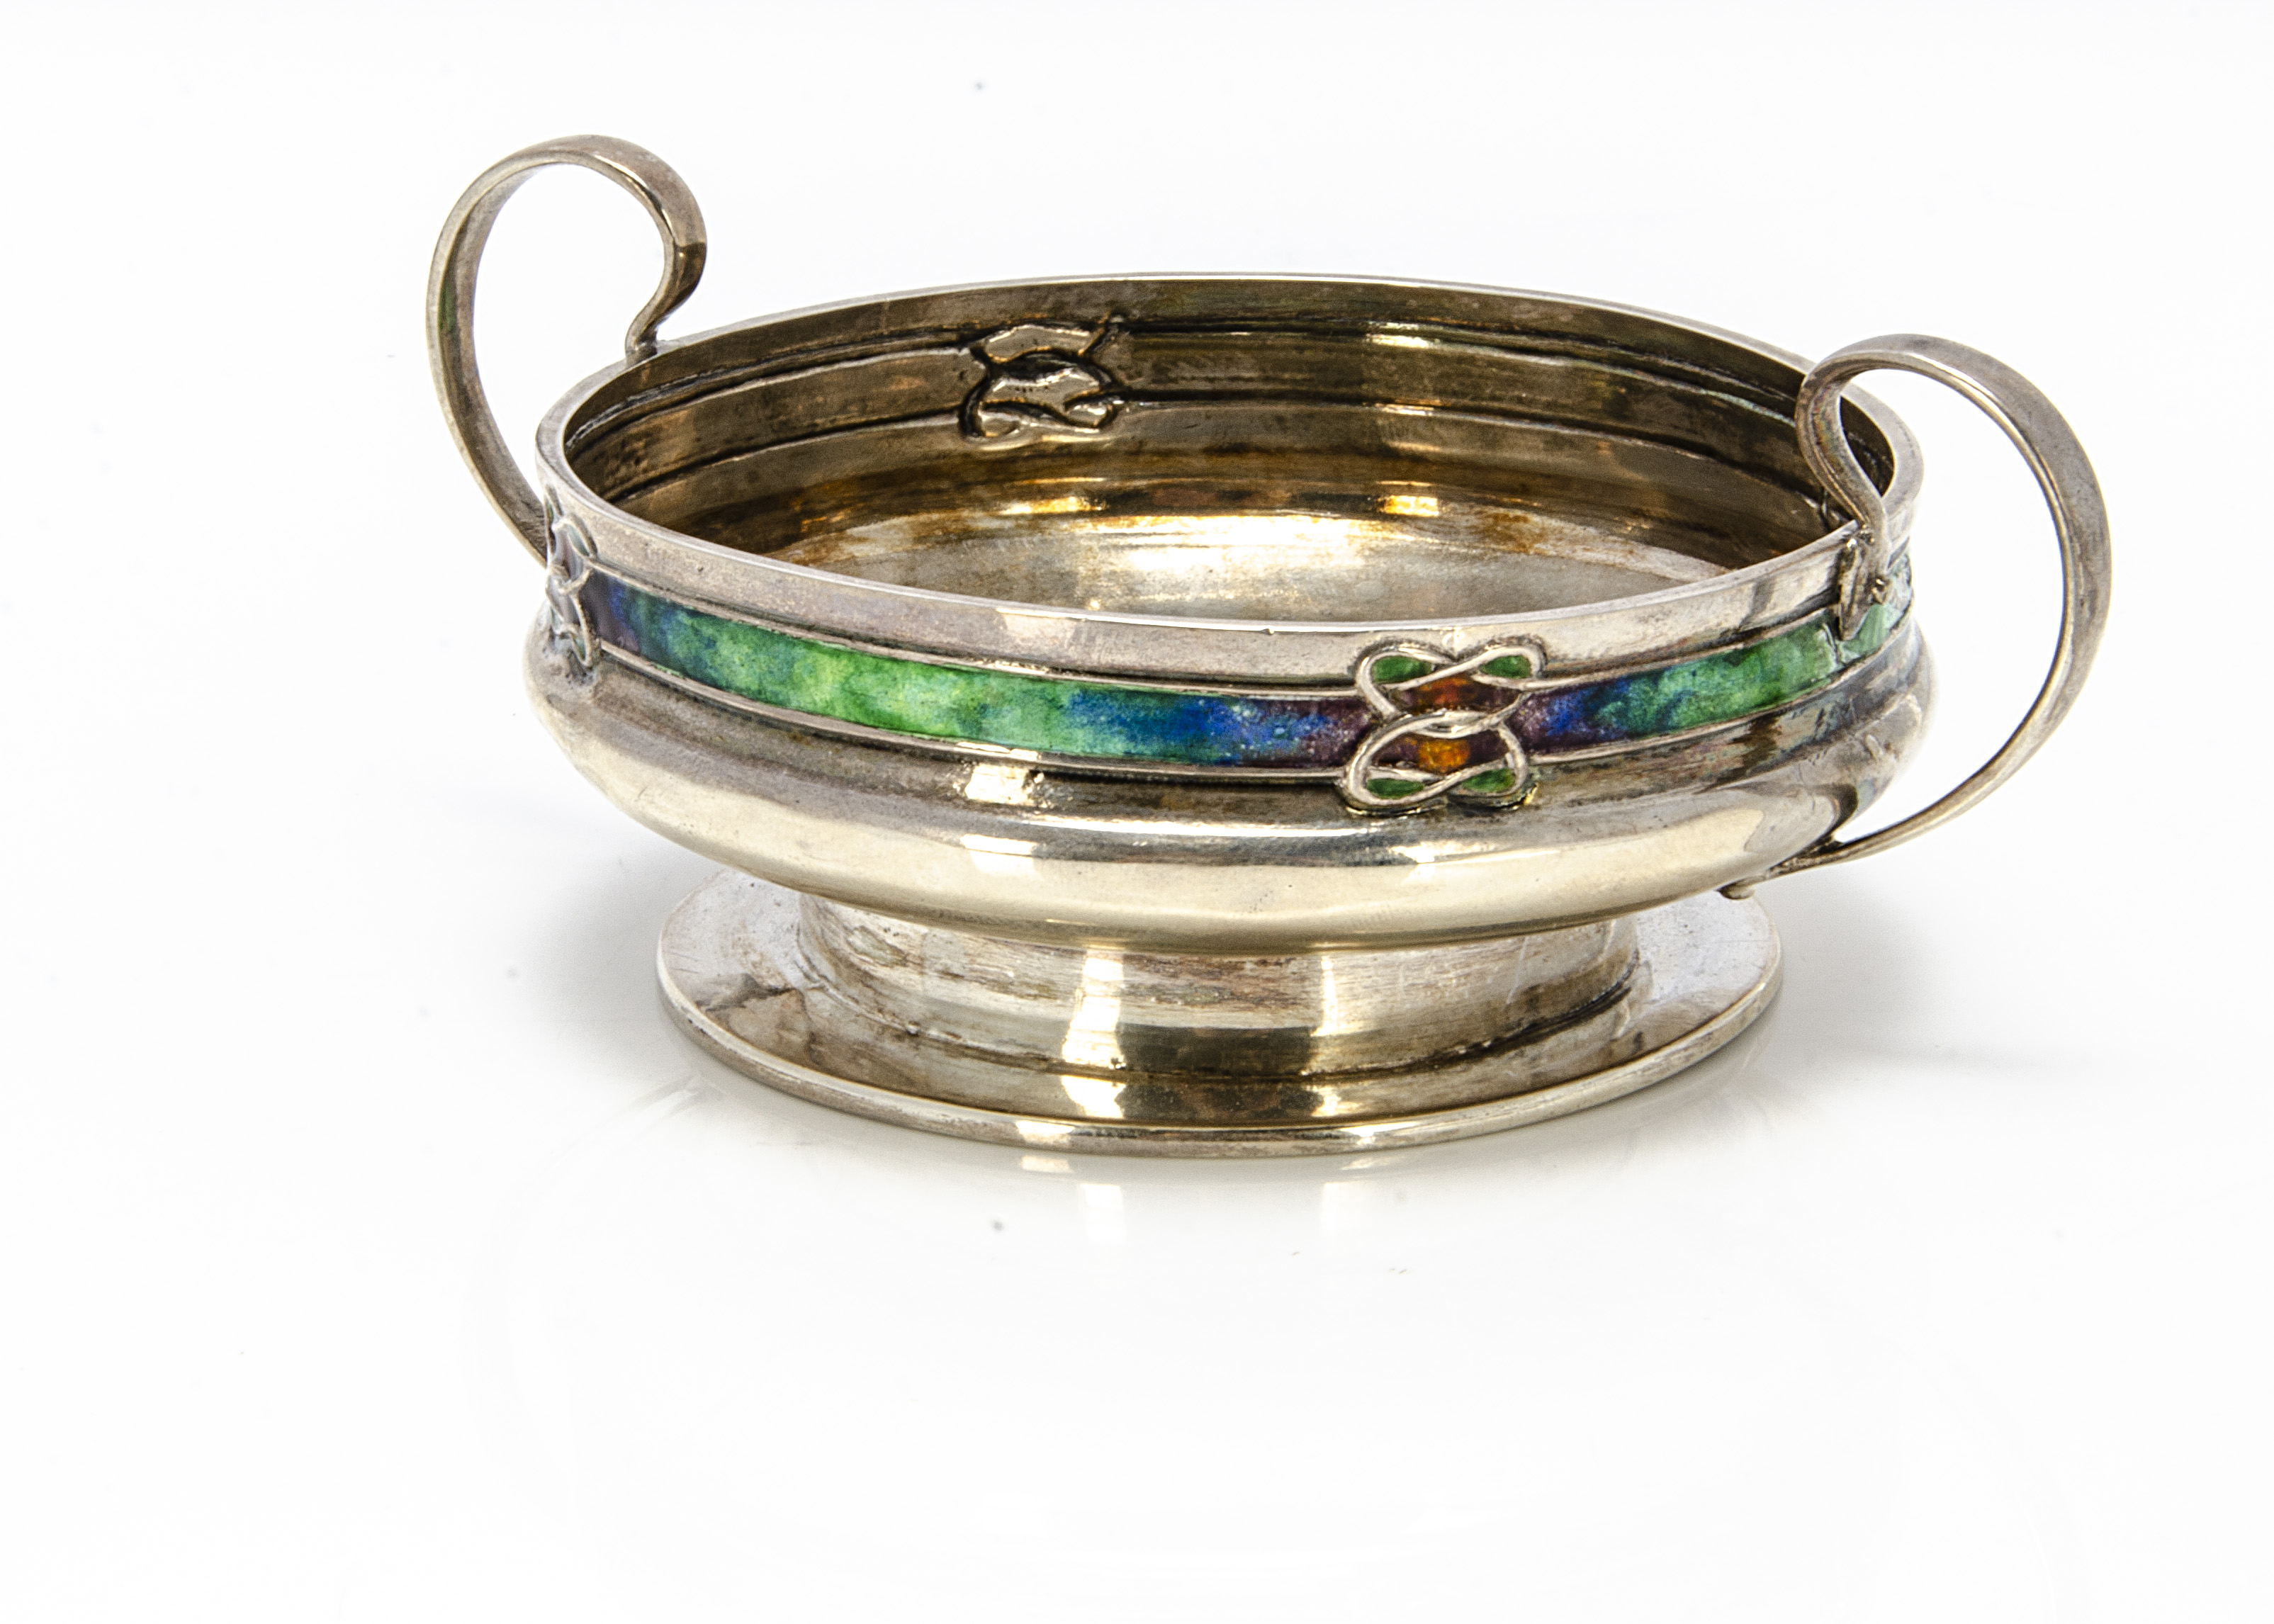 An Edwardian Arts & Crafts silver and enamelled twin handled footed small bowl from Liberty & Co,